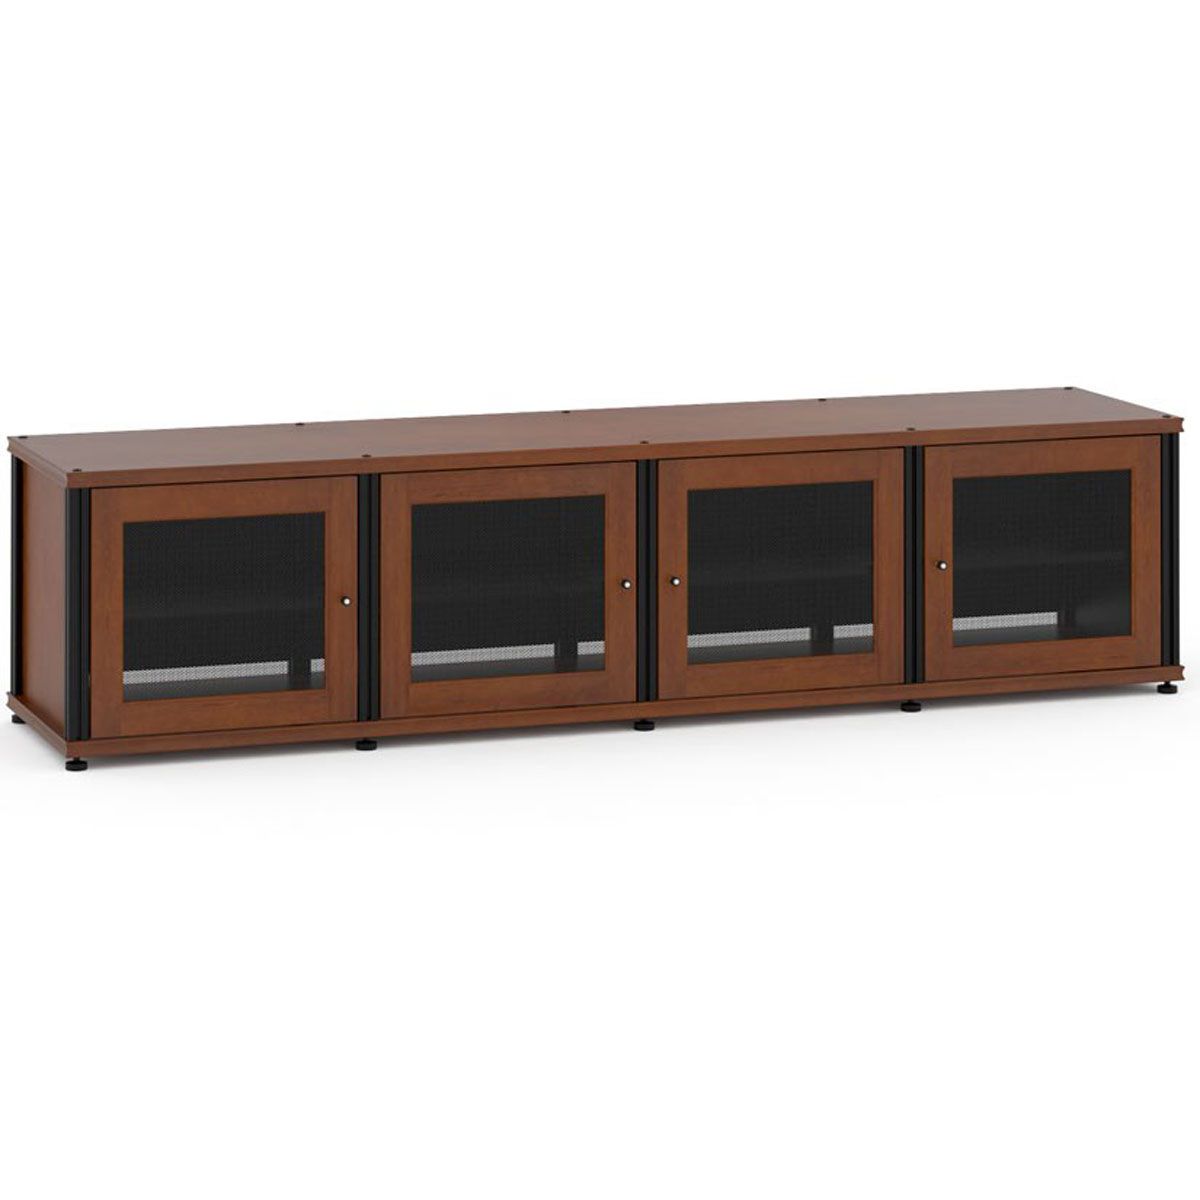 Salamander Designs Synergy Model 247 A/V Cabinet, Cherry w/ Black Posts, front angle view